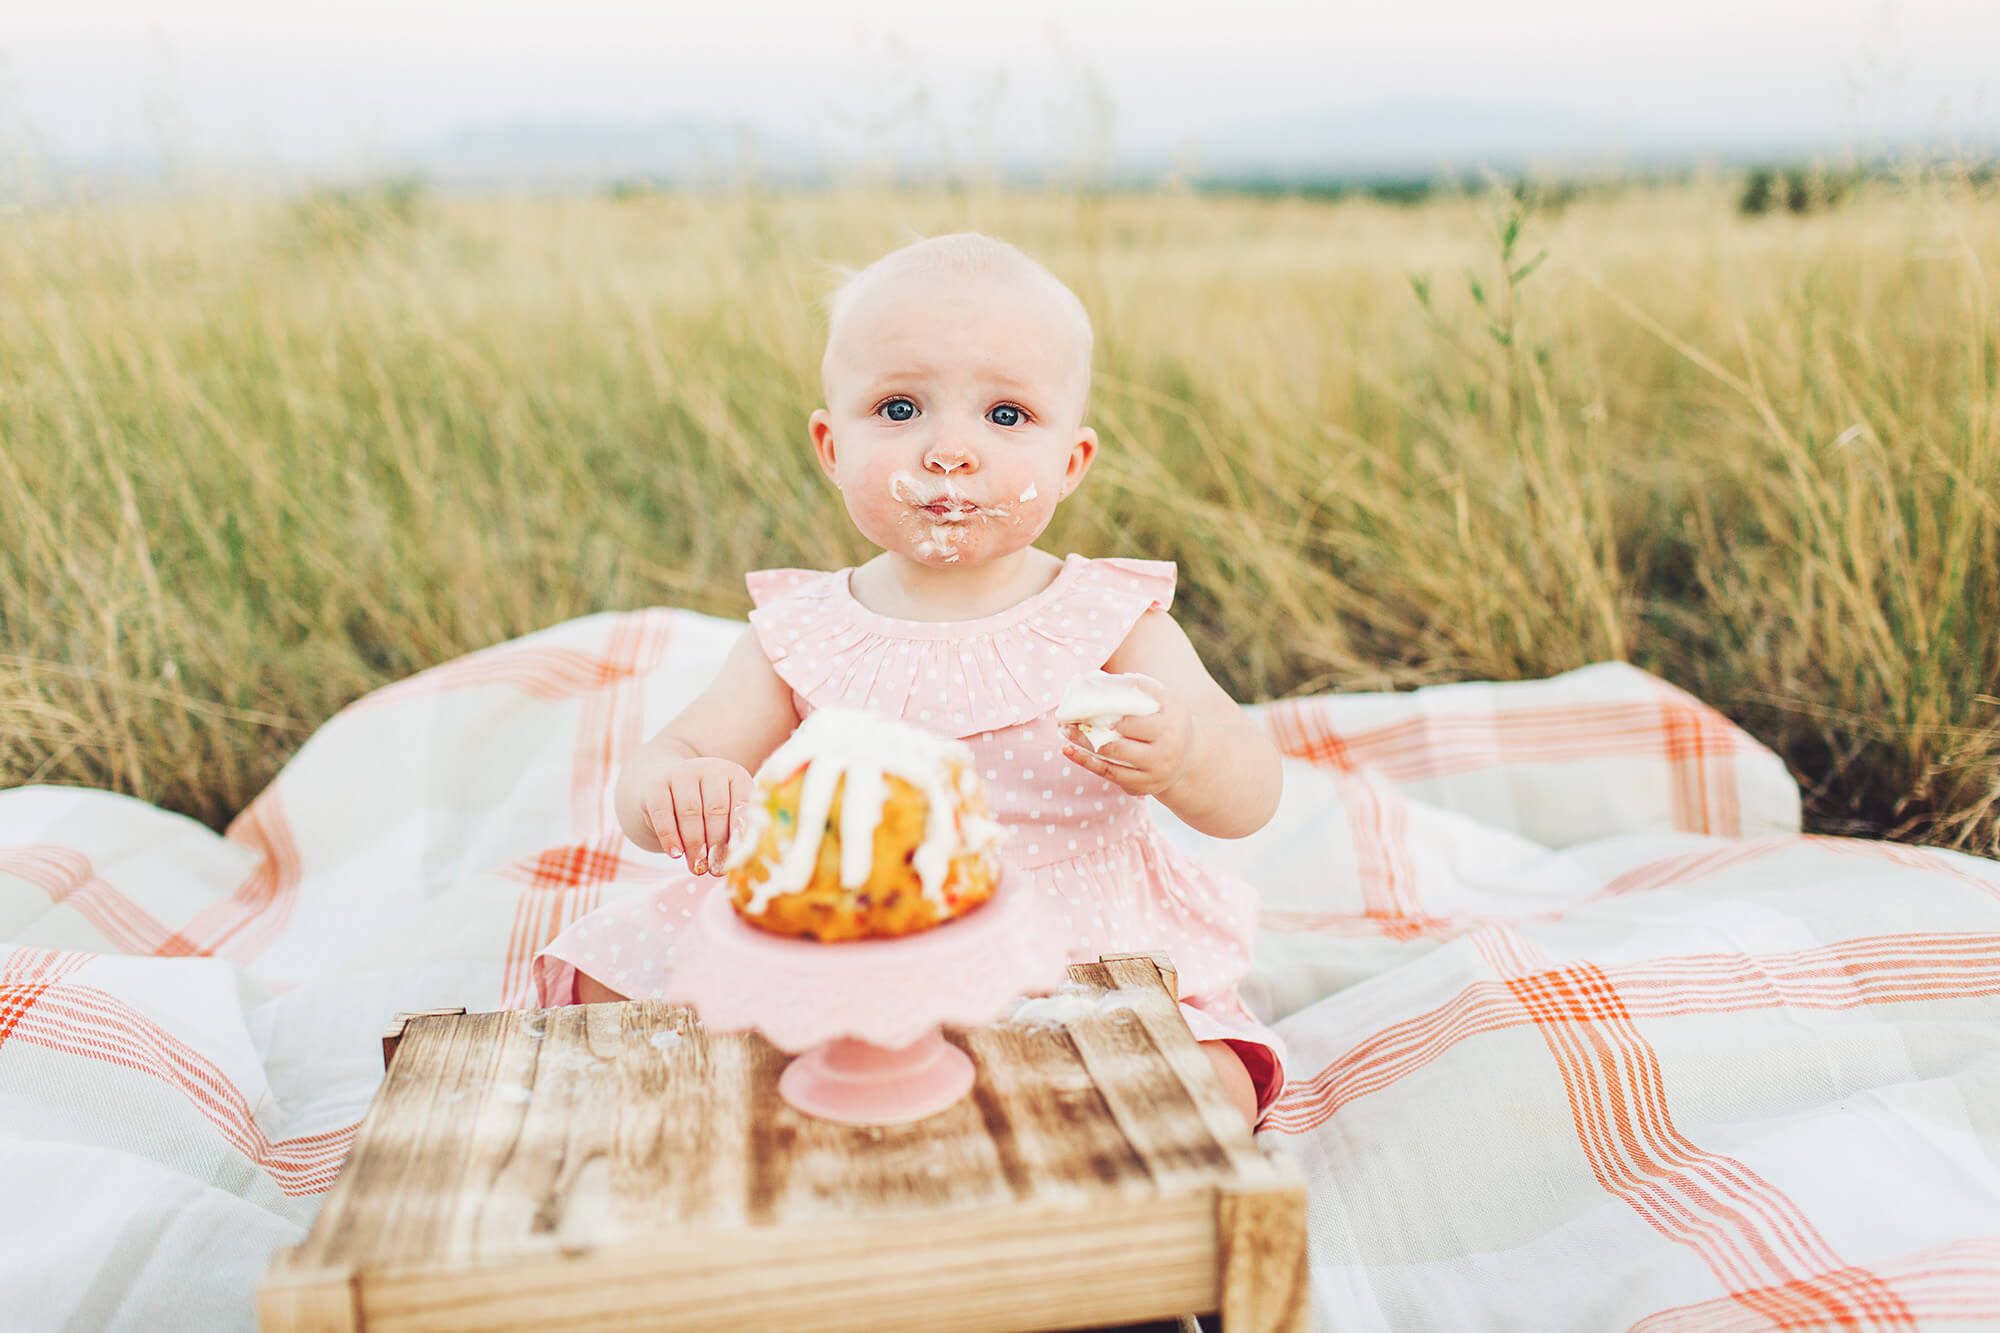 Loving her cake during this sweet girl's outdoor cake smash session